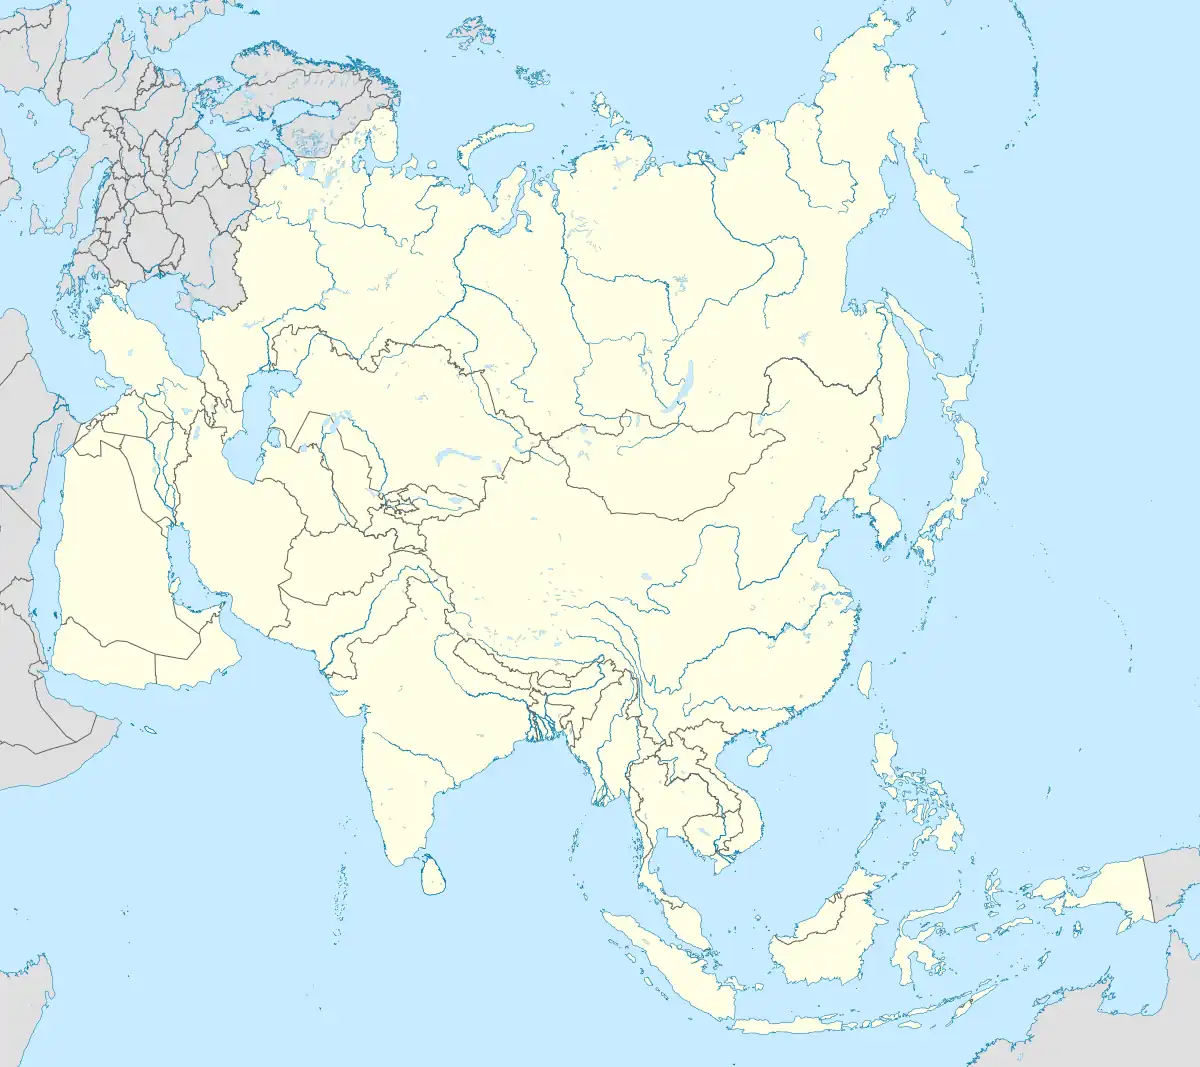 RJTT is located in Asia